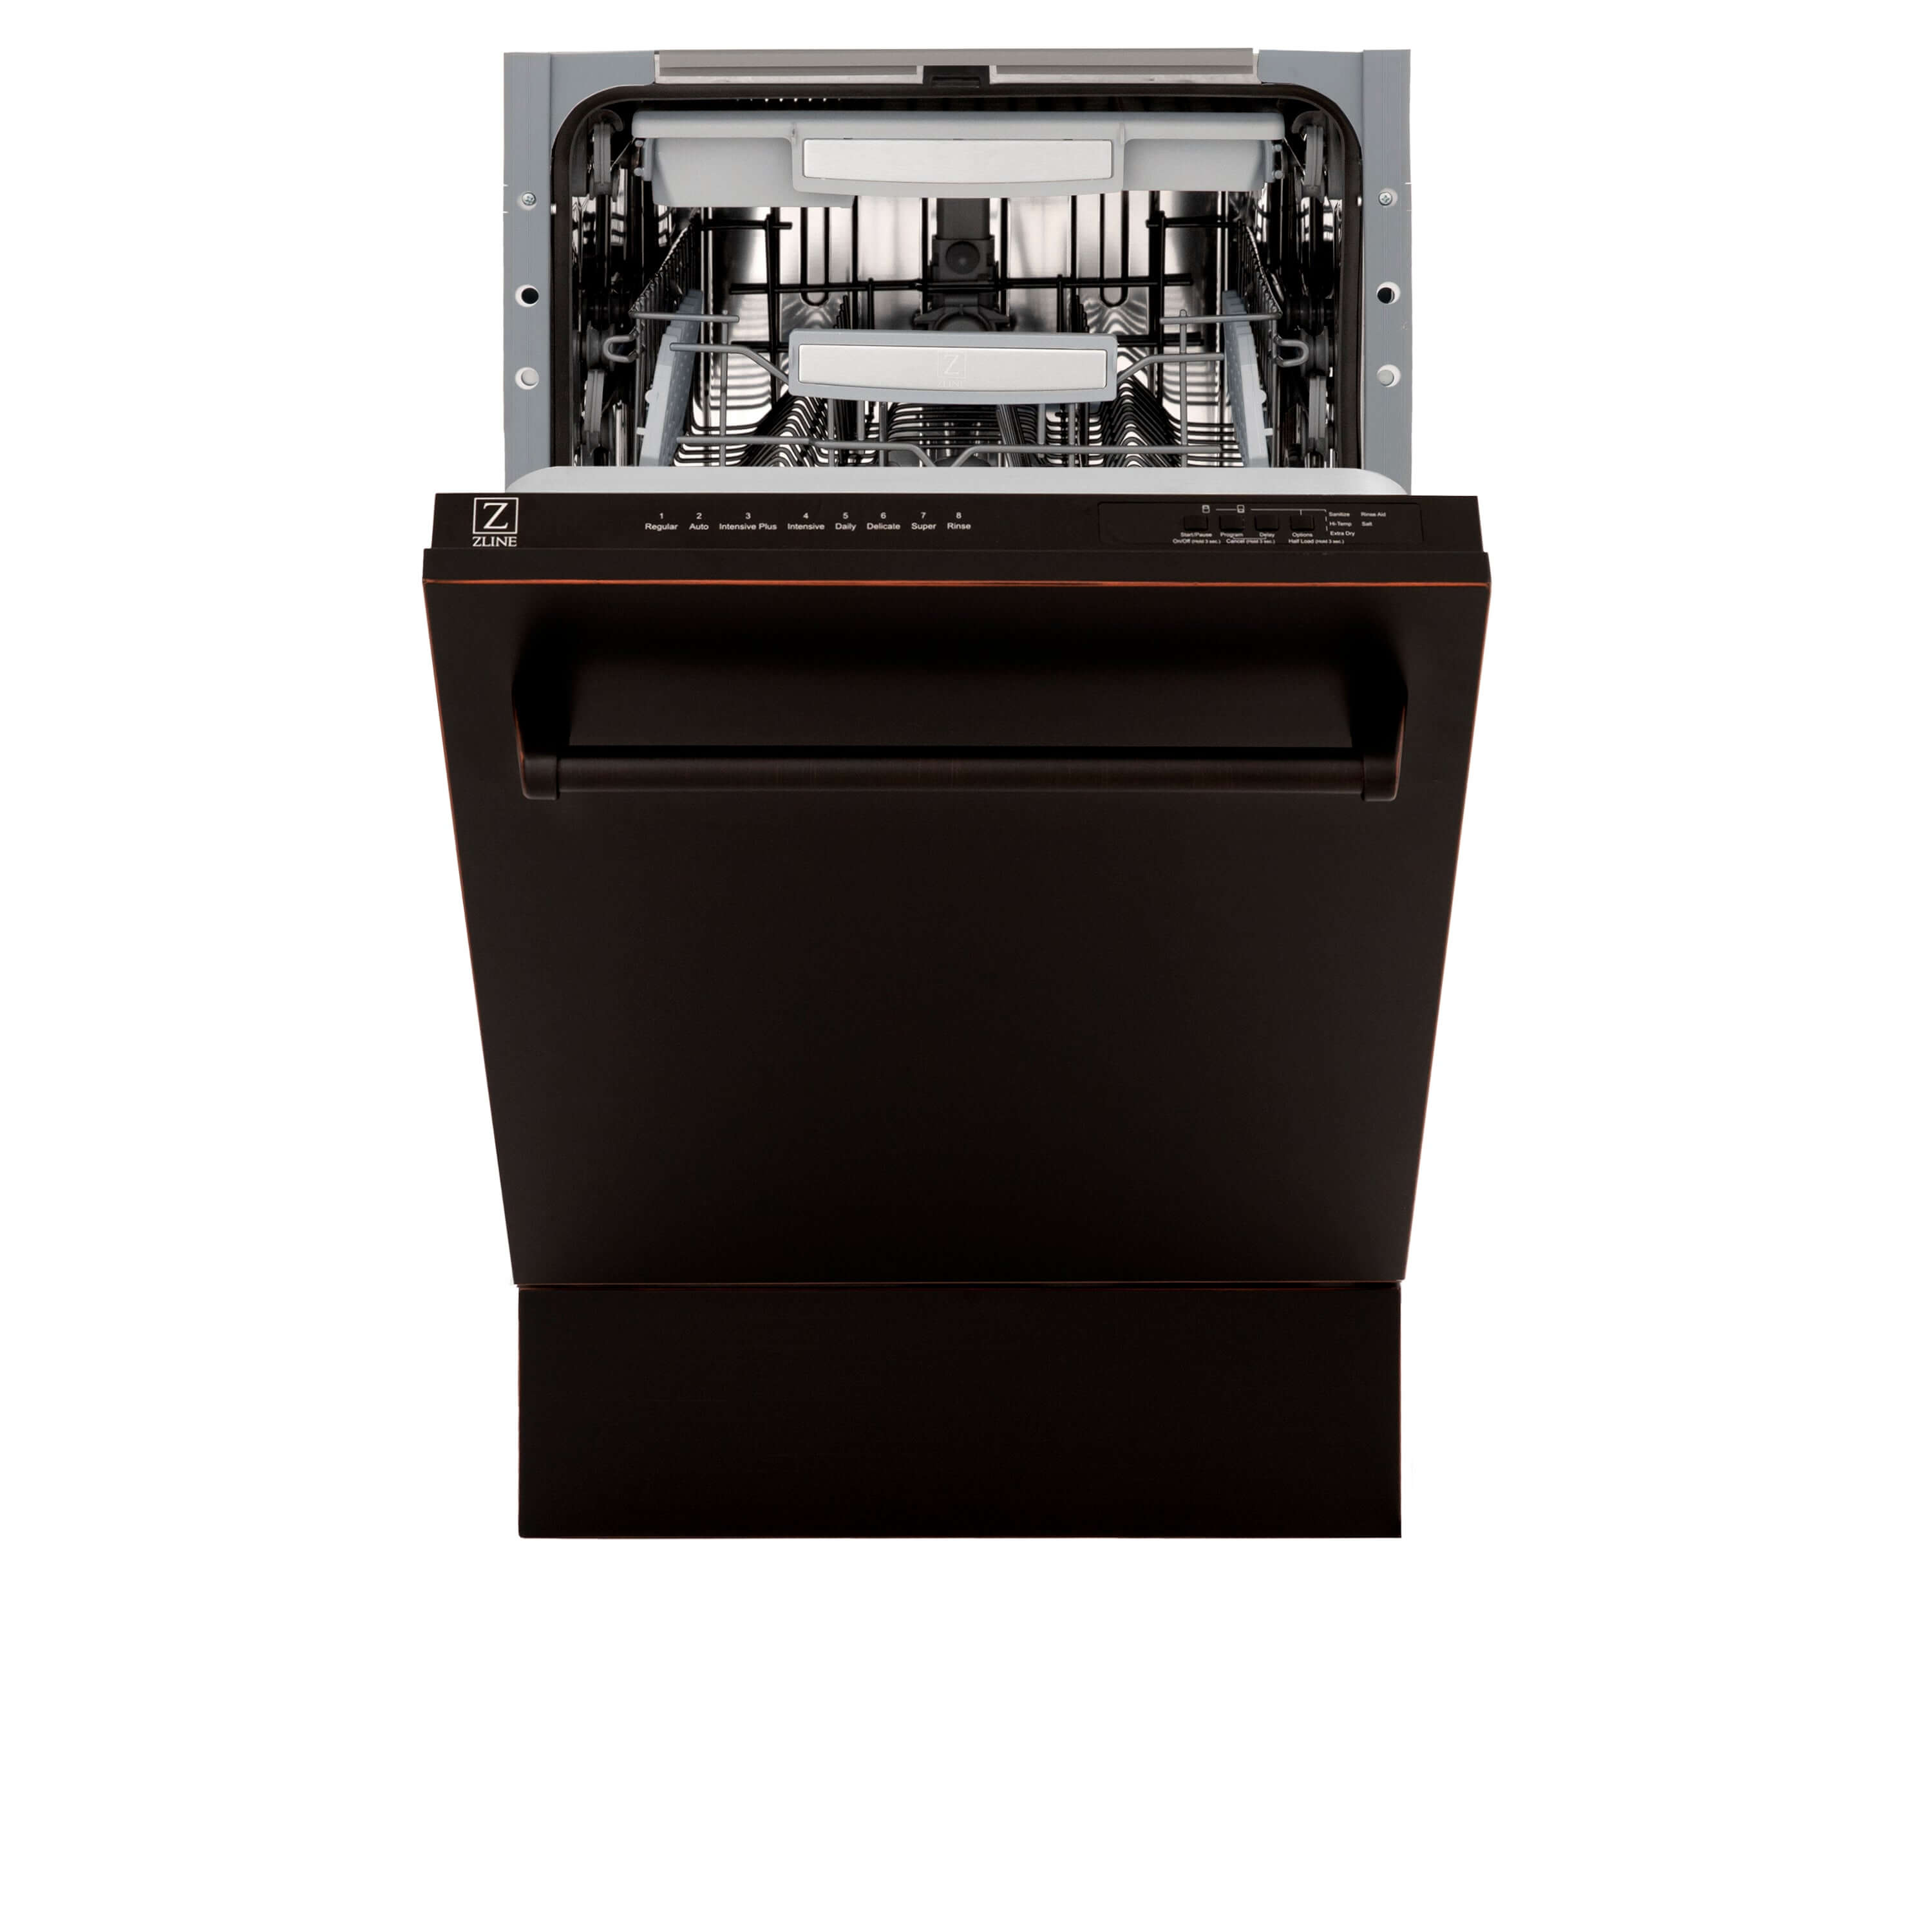 ZLINE 18 in. Tallac Series 3rd Rack Top Control Built-In Dishwasher in Oil Rubbed Bronze with Stainless Steel Tub, 51dBa (DWV-ORB-18) front, half open.